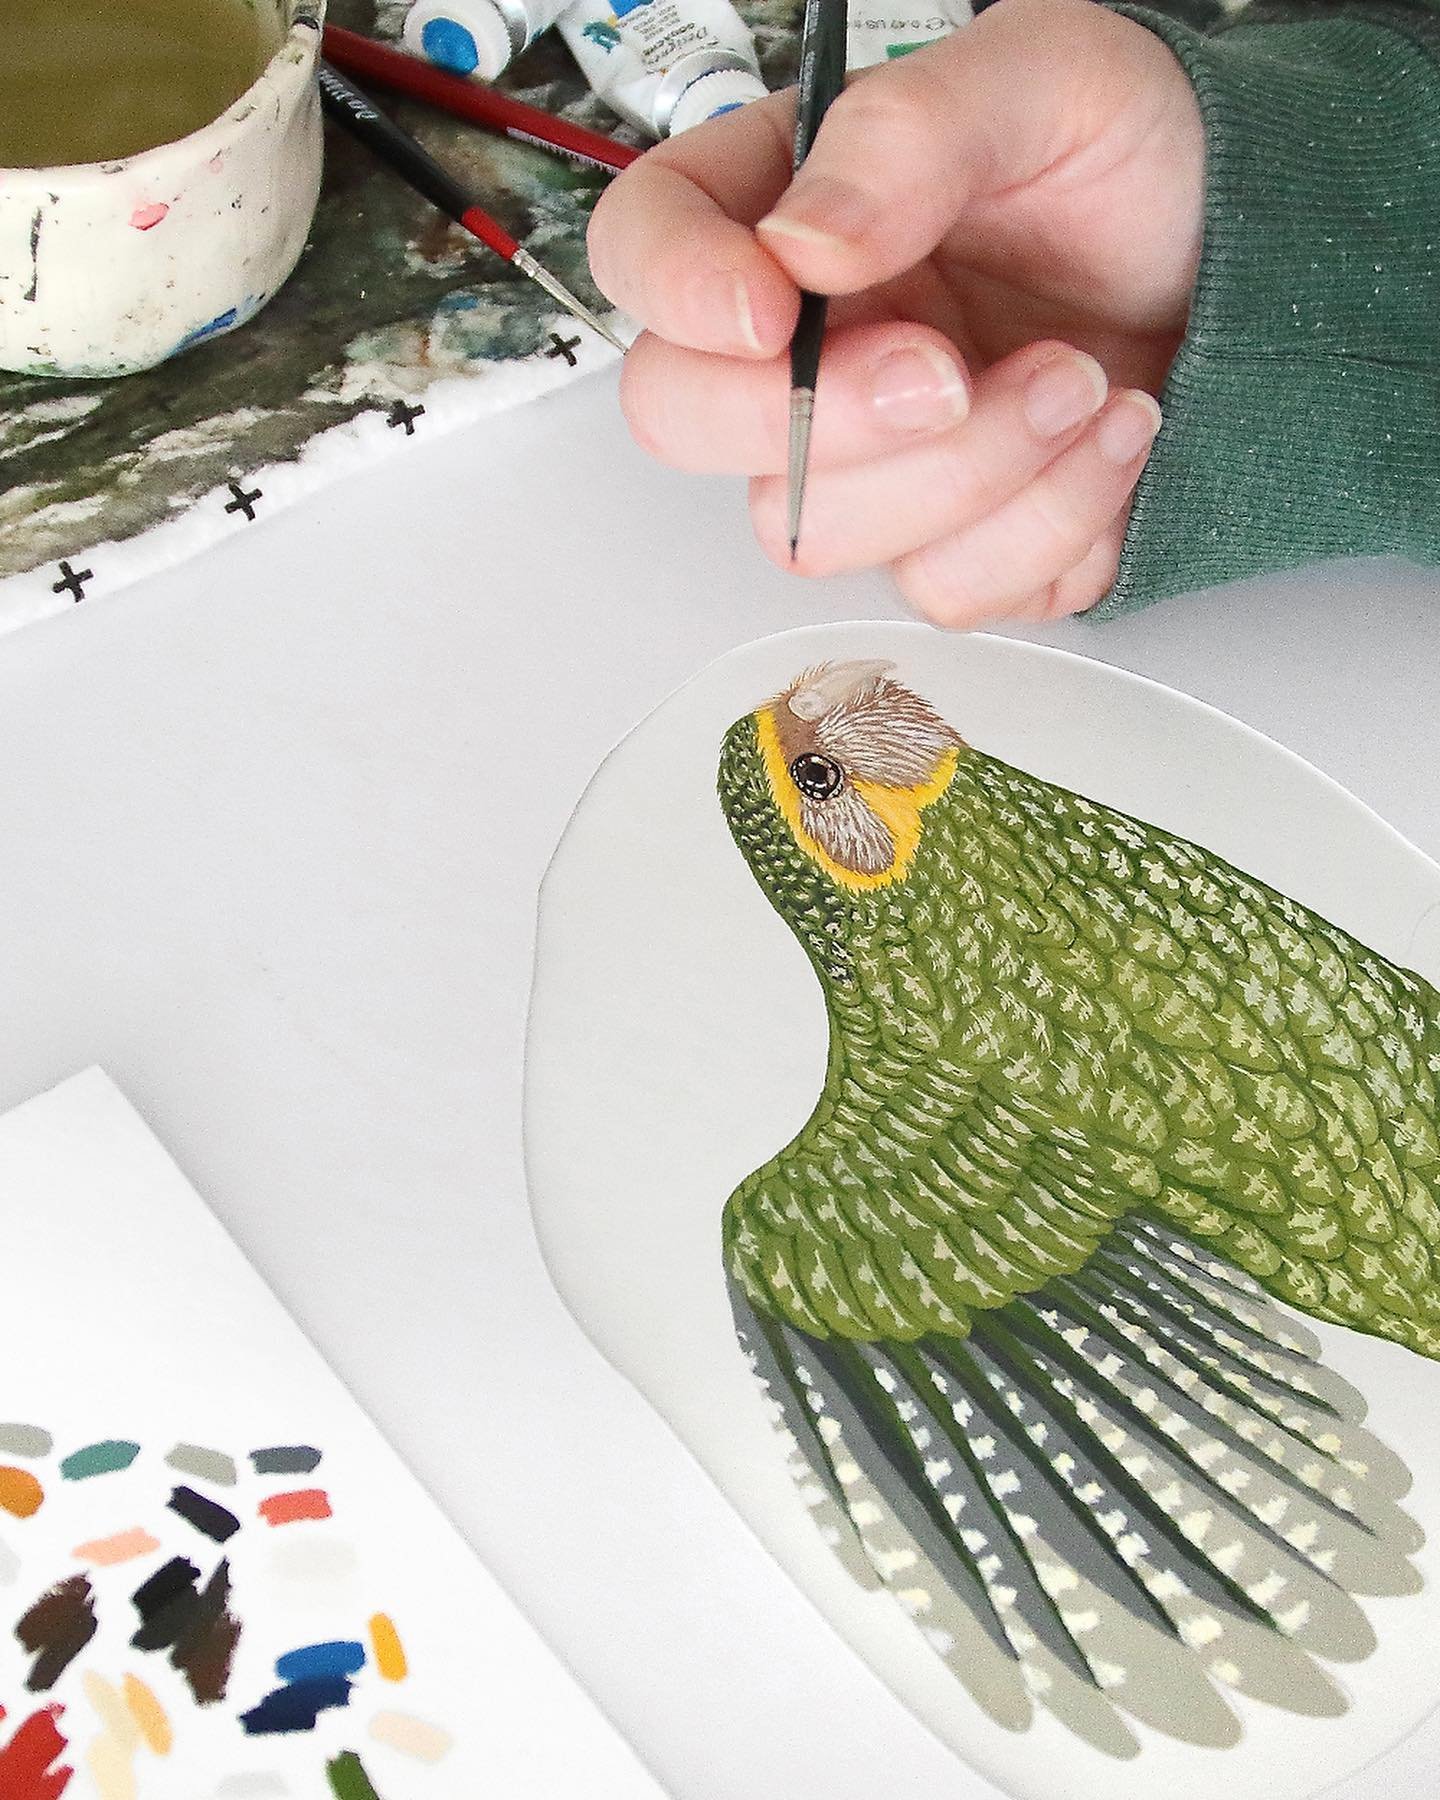 Slowly bringing this kākāpō to life 💚

I&rsquo;ve been working on illustrating a whole bunch of birds that I&rsquo;ll share the results of soon! This kākāpō was especially fun to paint 🎨

#birdartist #nzbirdartist #kākāpō